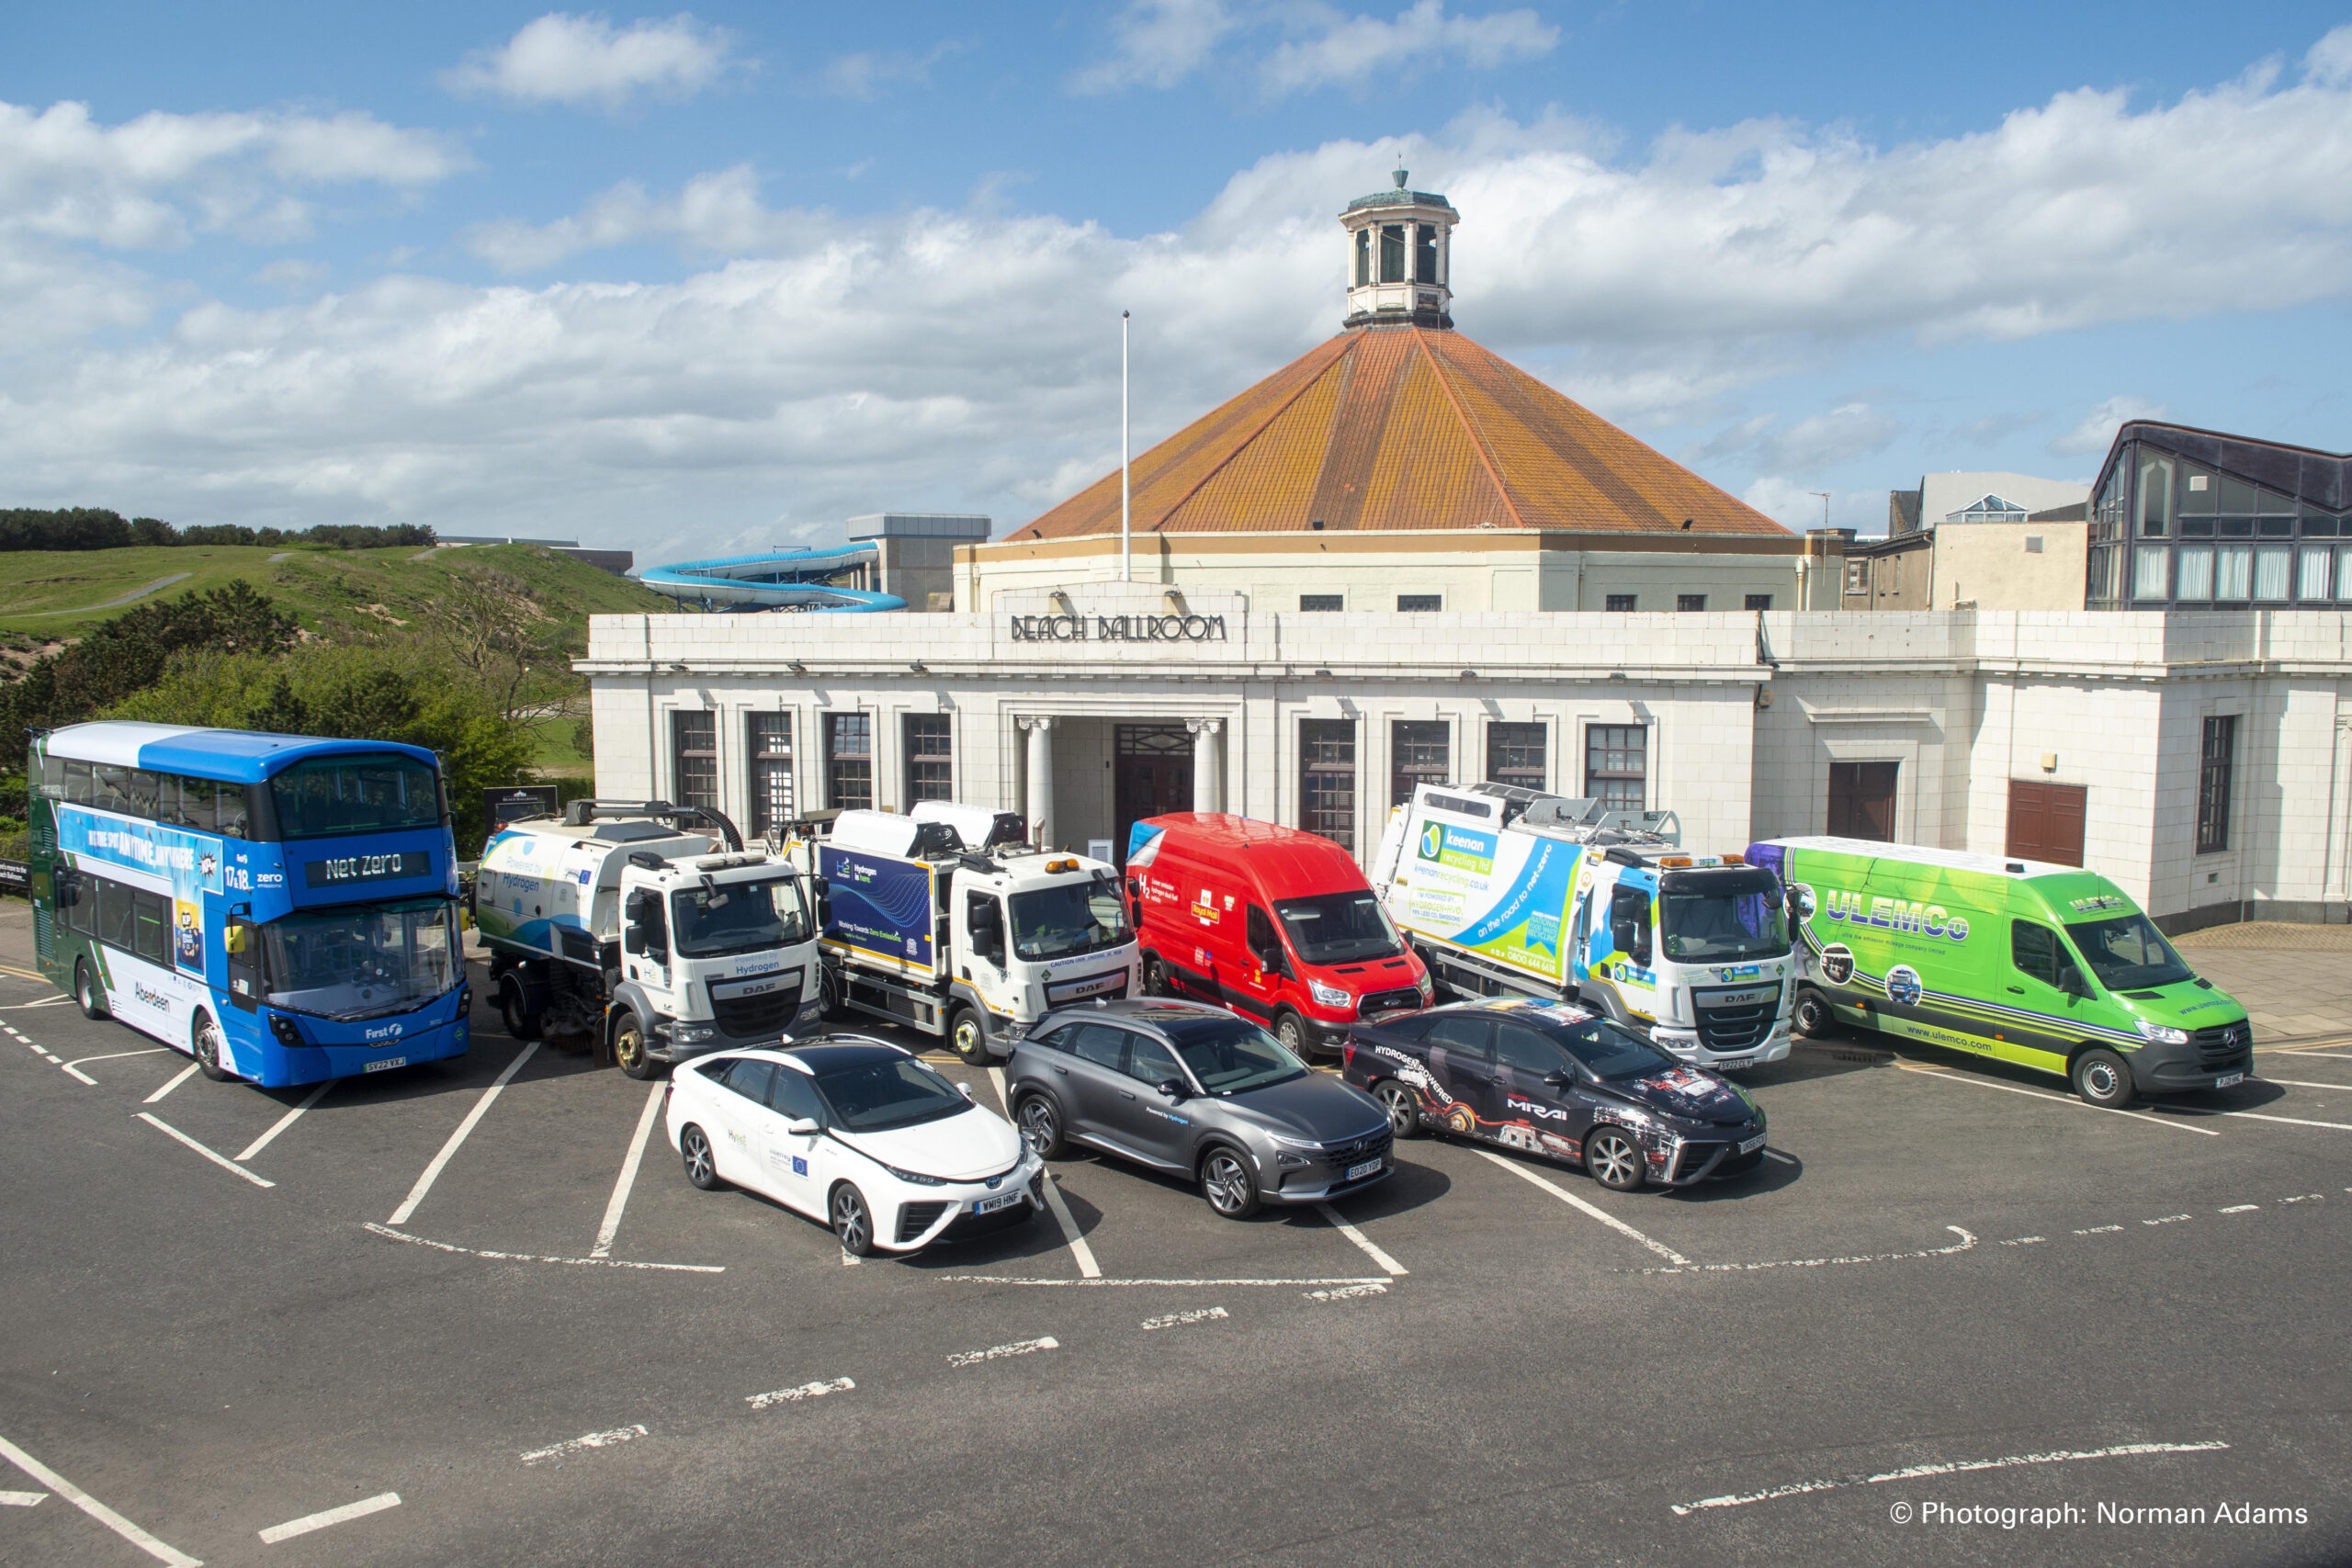 MEMBER NEWS: Planning approval paves way for first phase of Aberdeen Hydrogen Hub